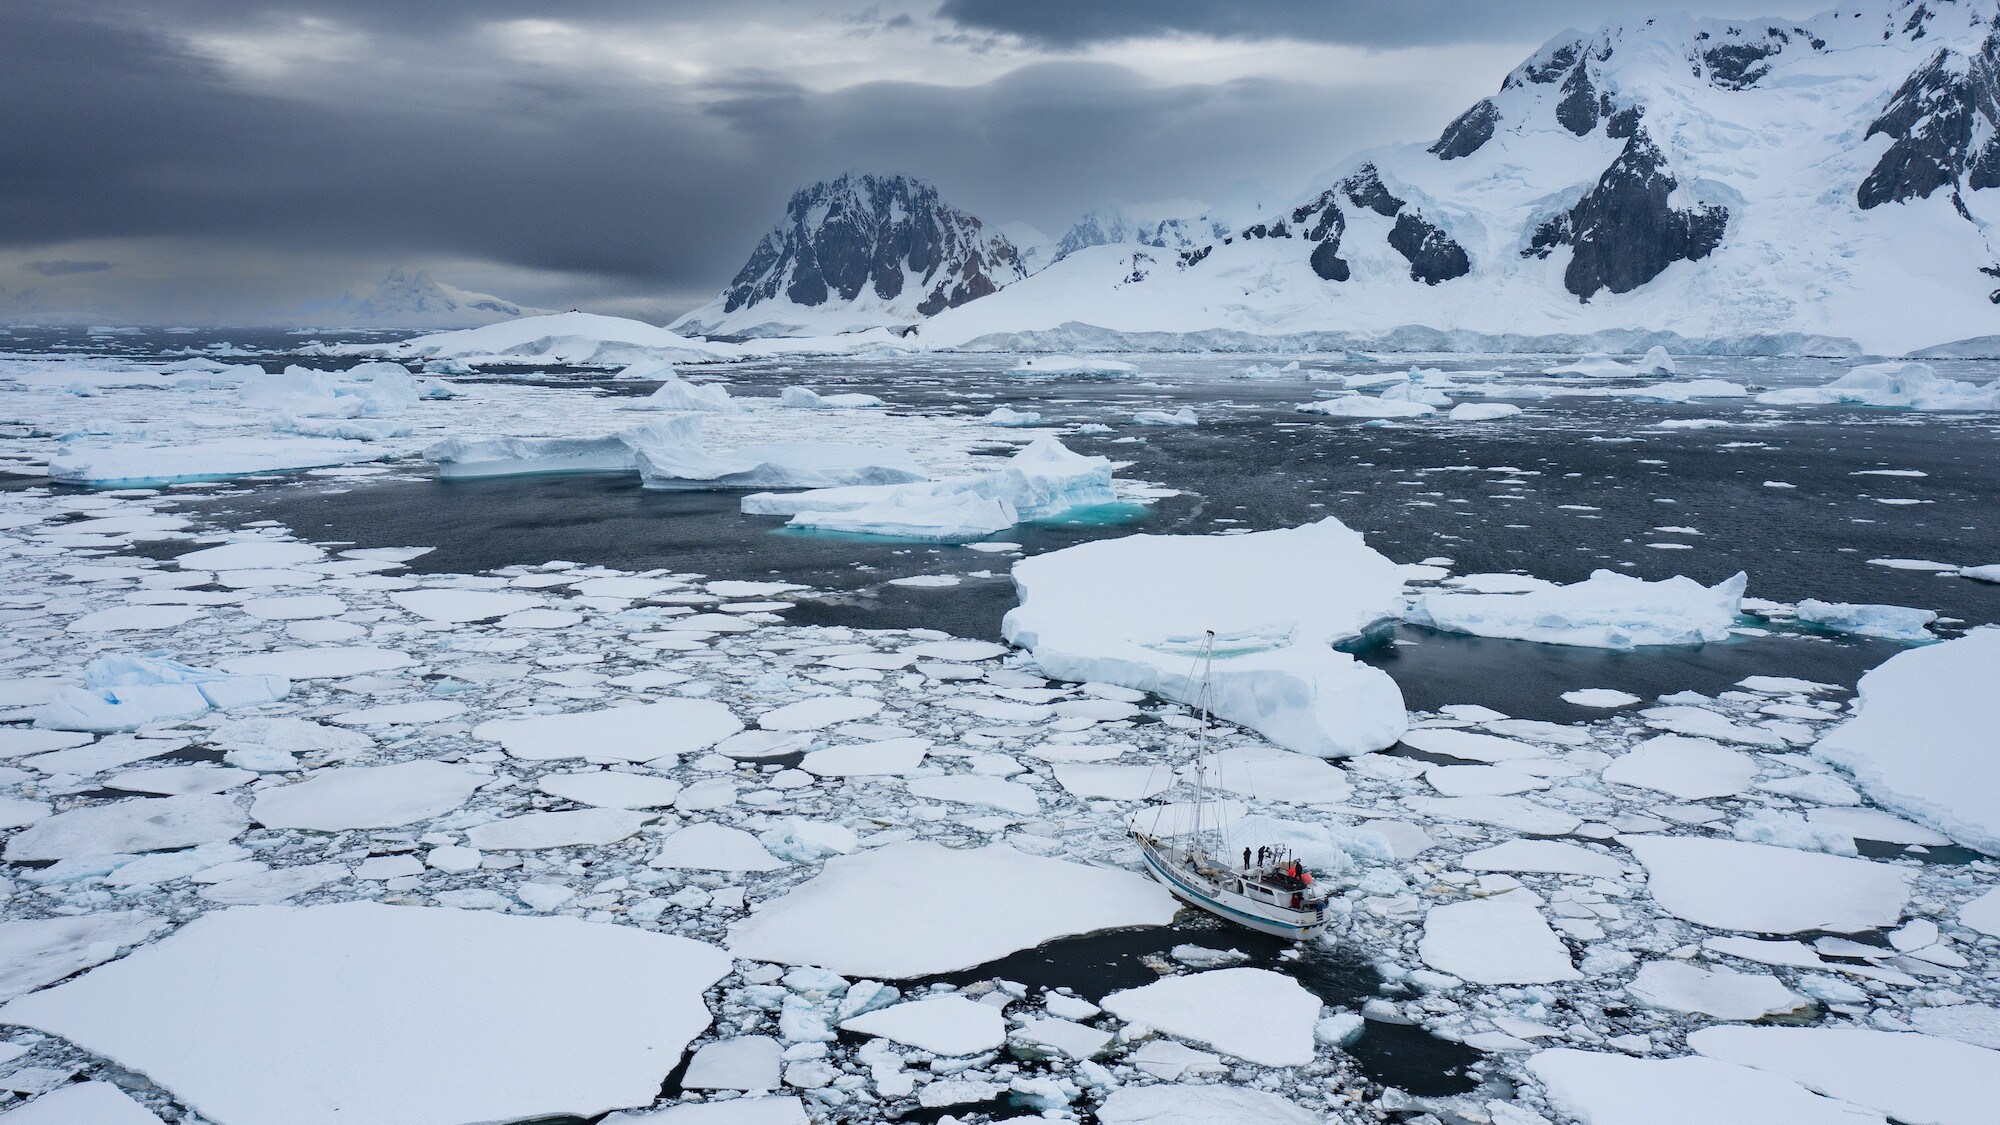 High, distant shot of the Australis sailing through the ice flow. (credit: National Geographic for Disney+/Bertie Gregory)